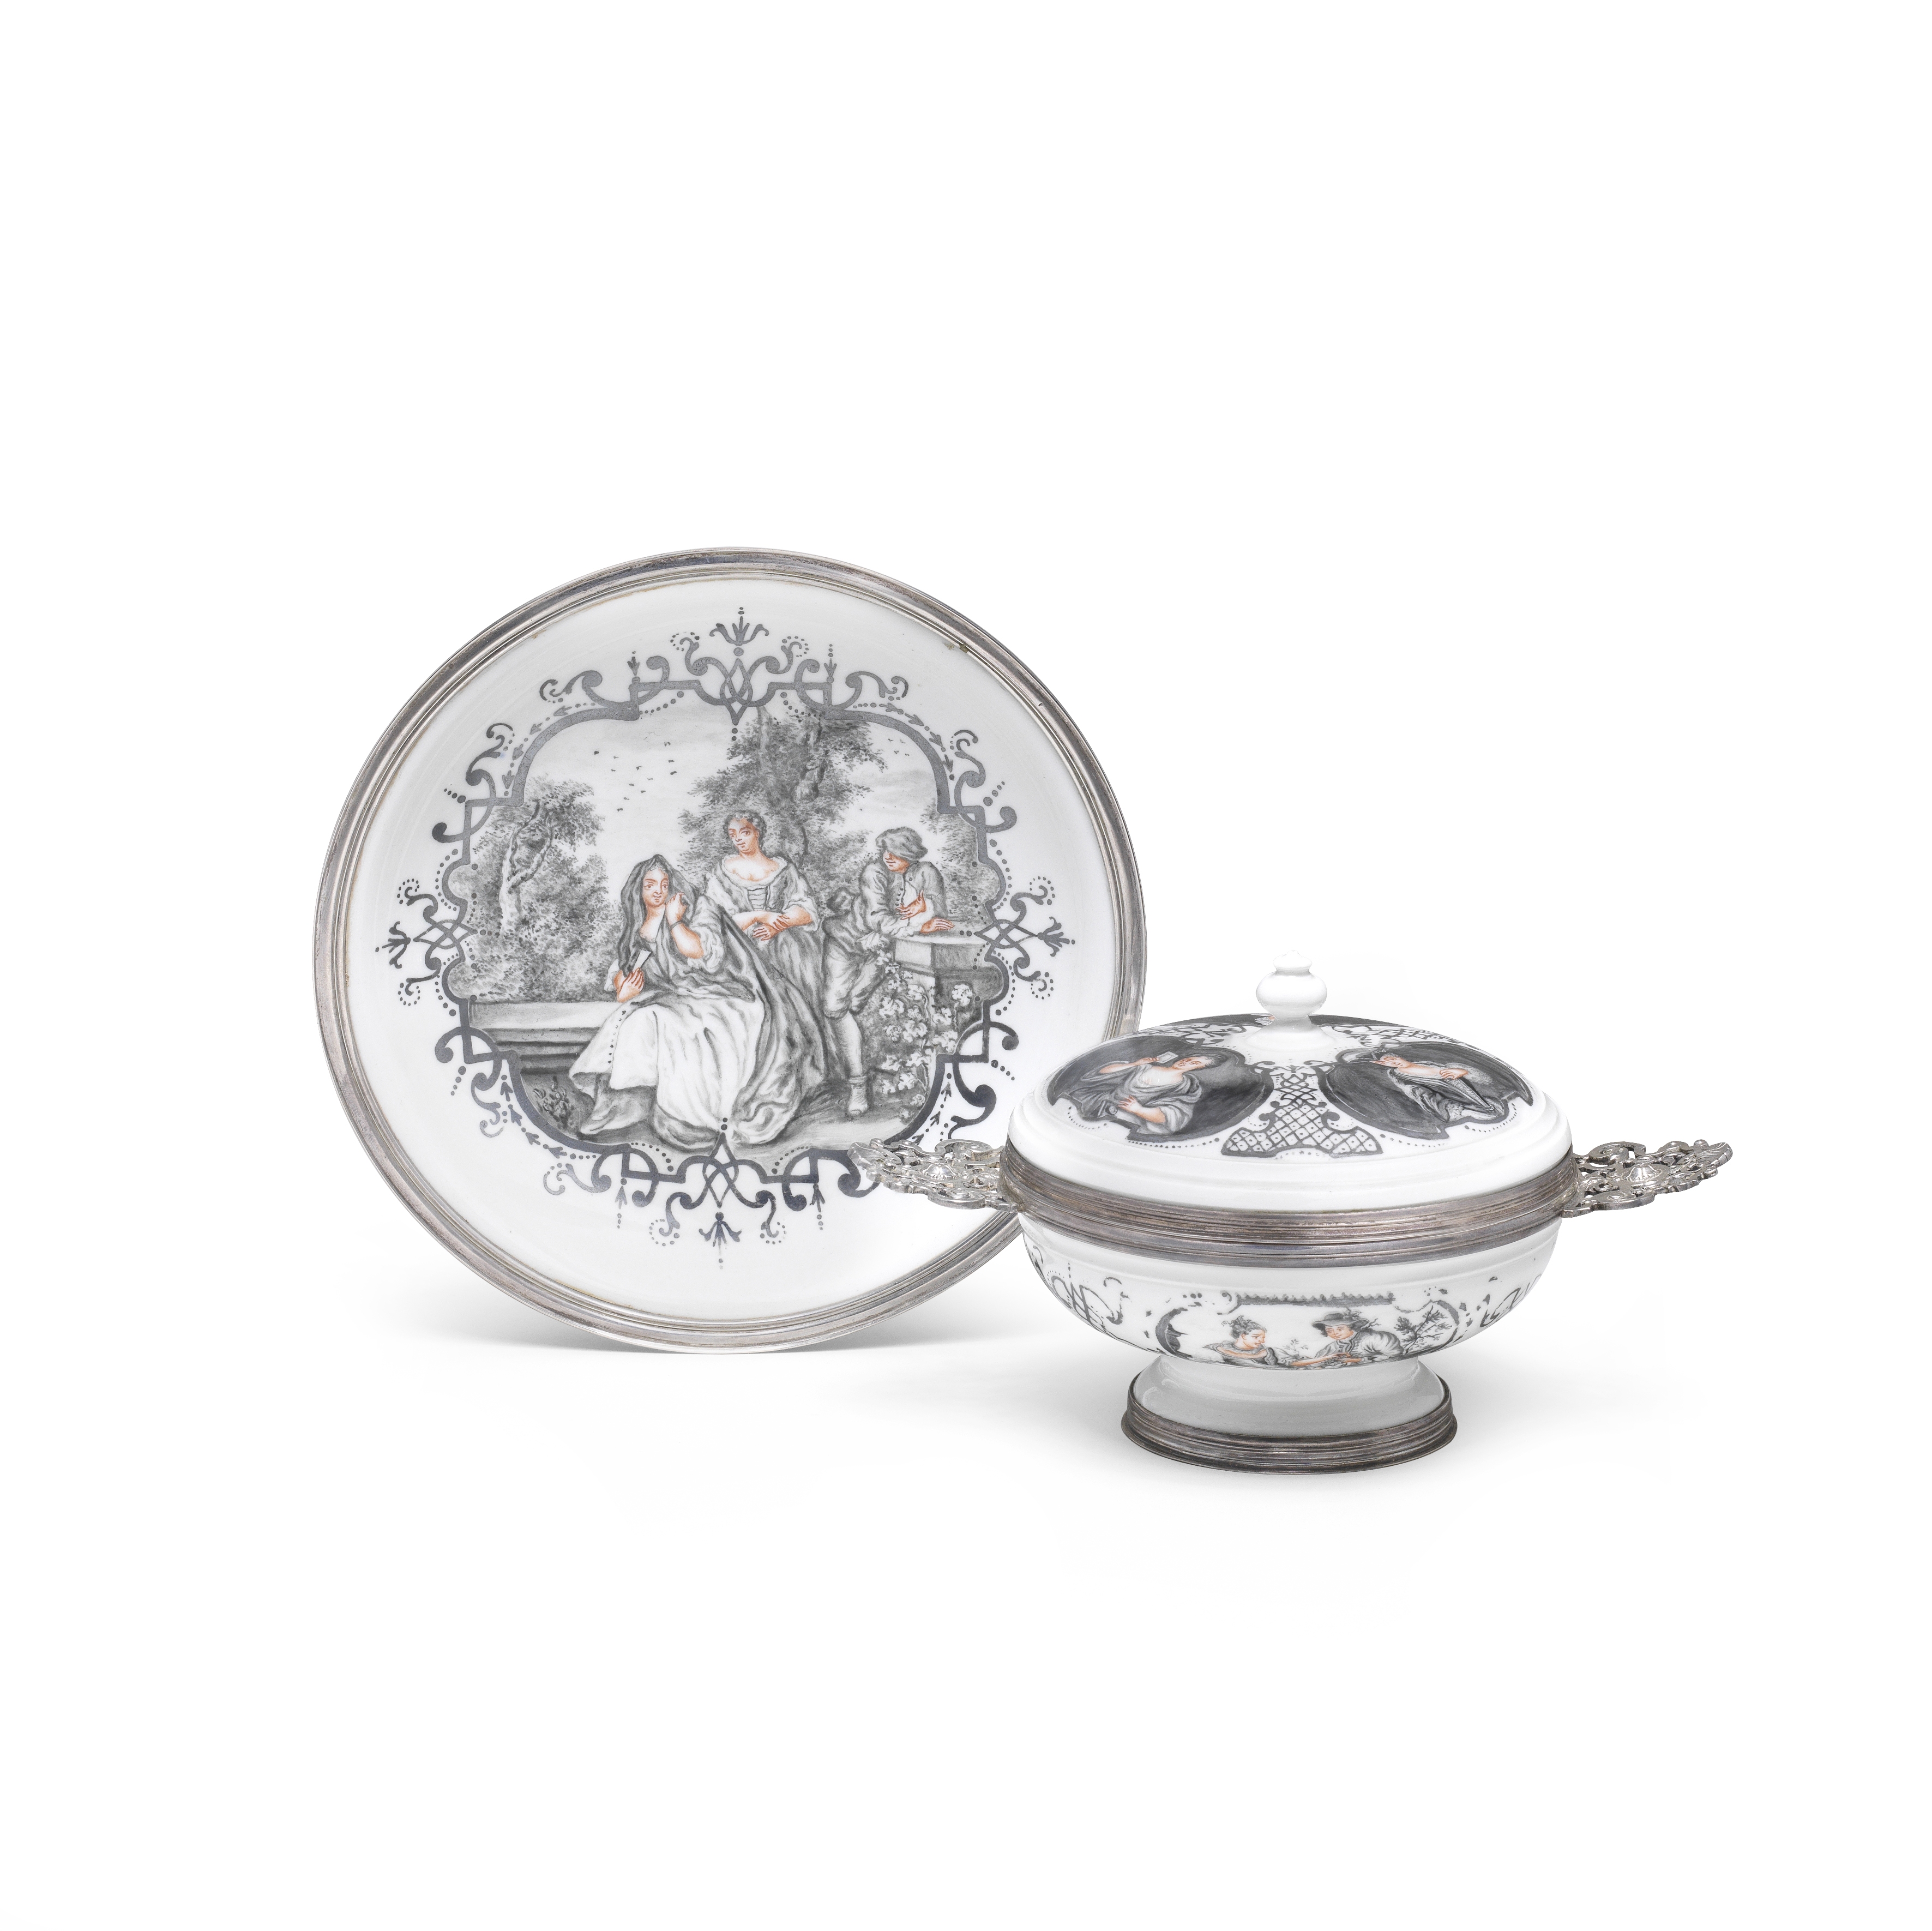 A Meissen silver-mounted Hausmaler ecuelle, cover and stand, circa 1720, the decoration circa 1735